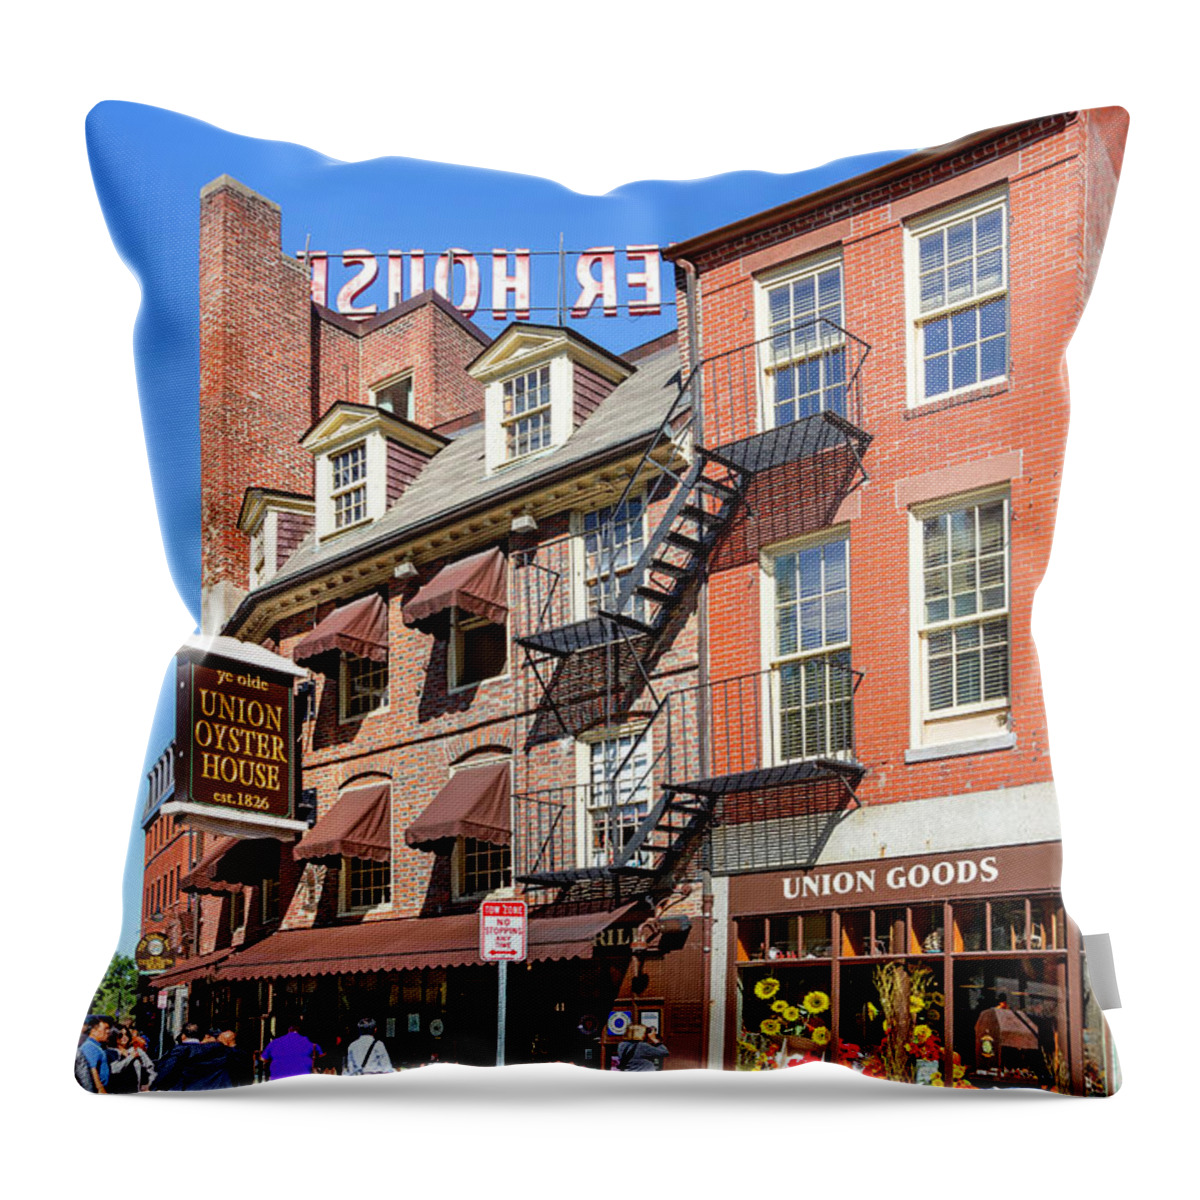 Estock Throw Pillow featuring the digital art Shops On Union Street, Boston Ma #2 by Lumiere